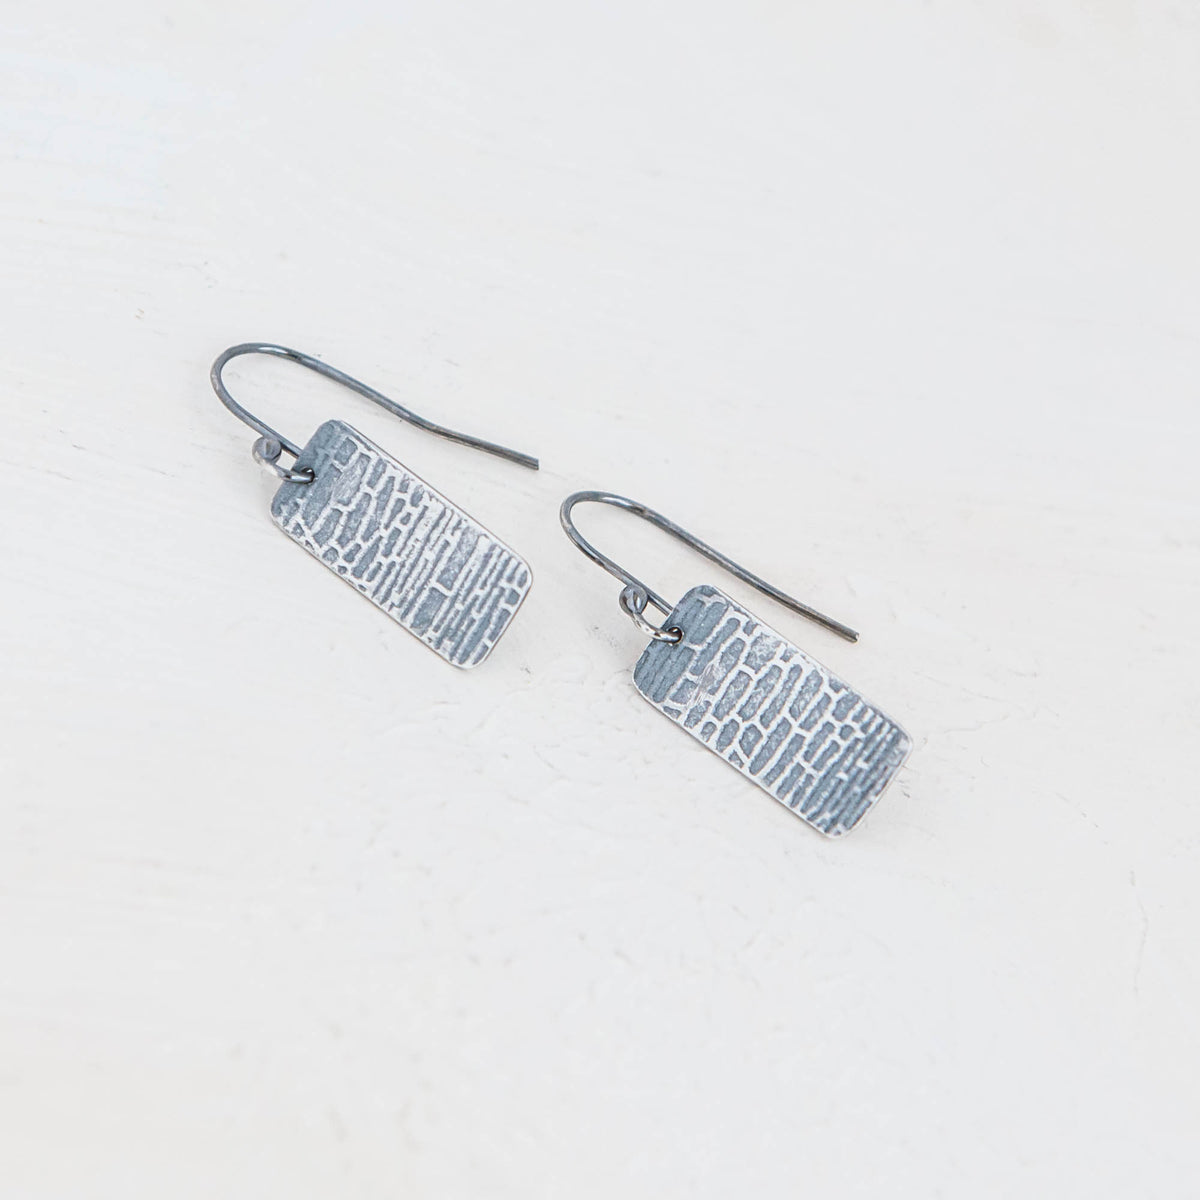 Patterned Rectangular Milled Oxidized Earrings